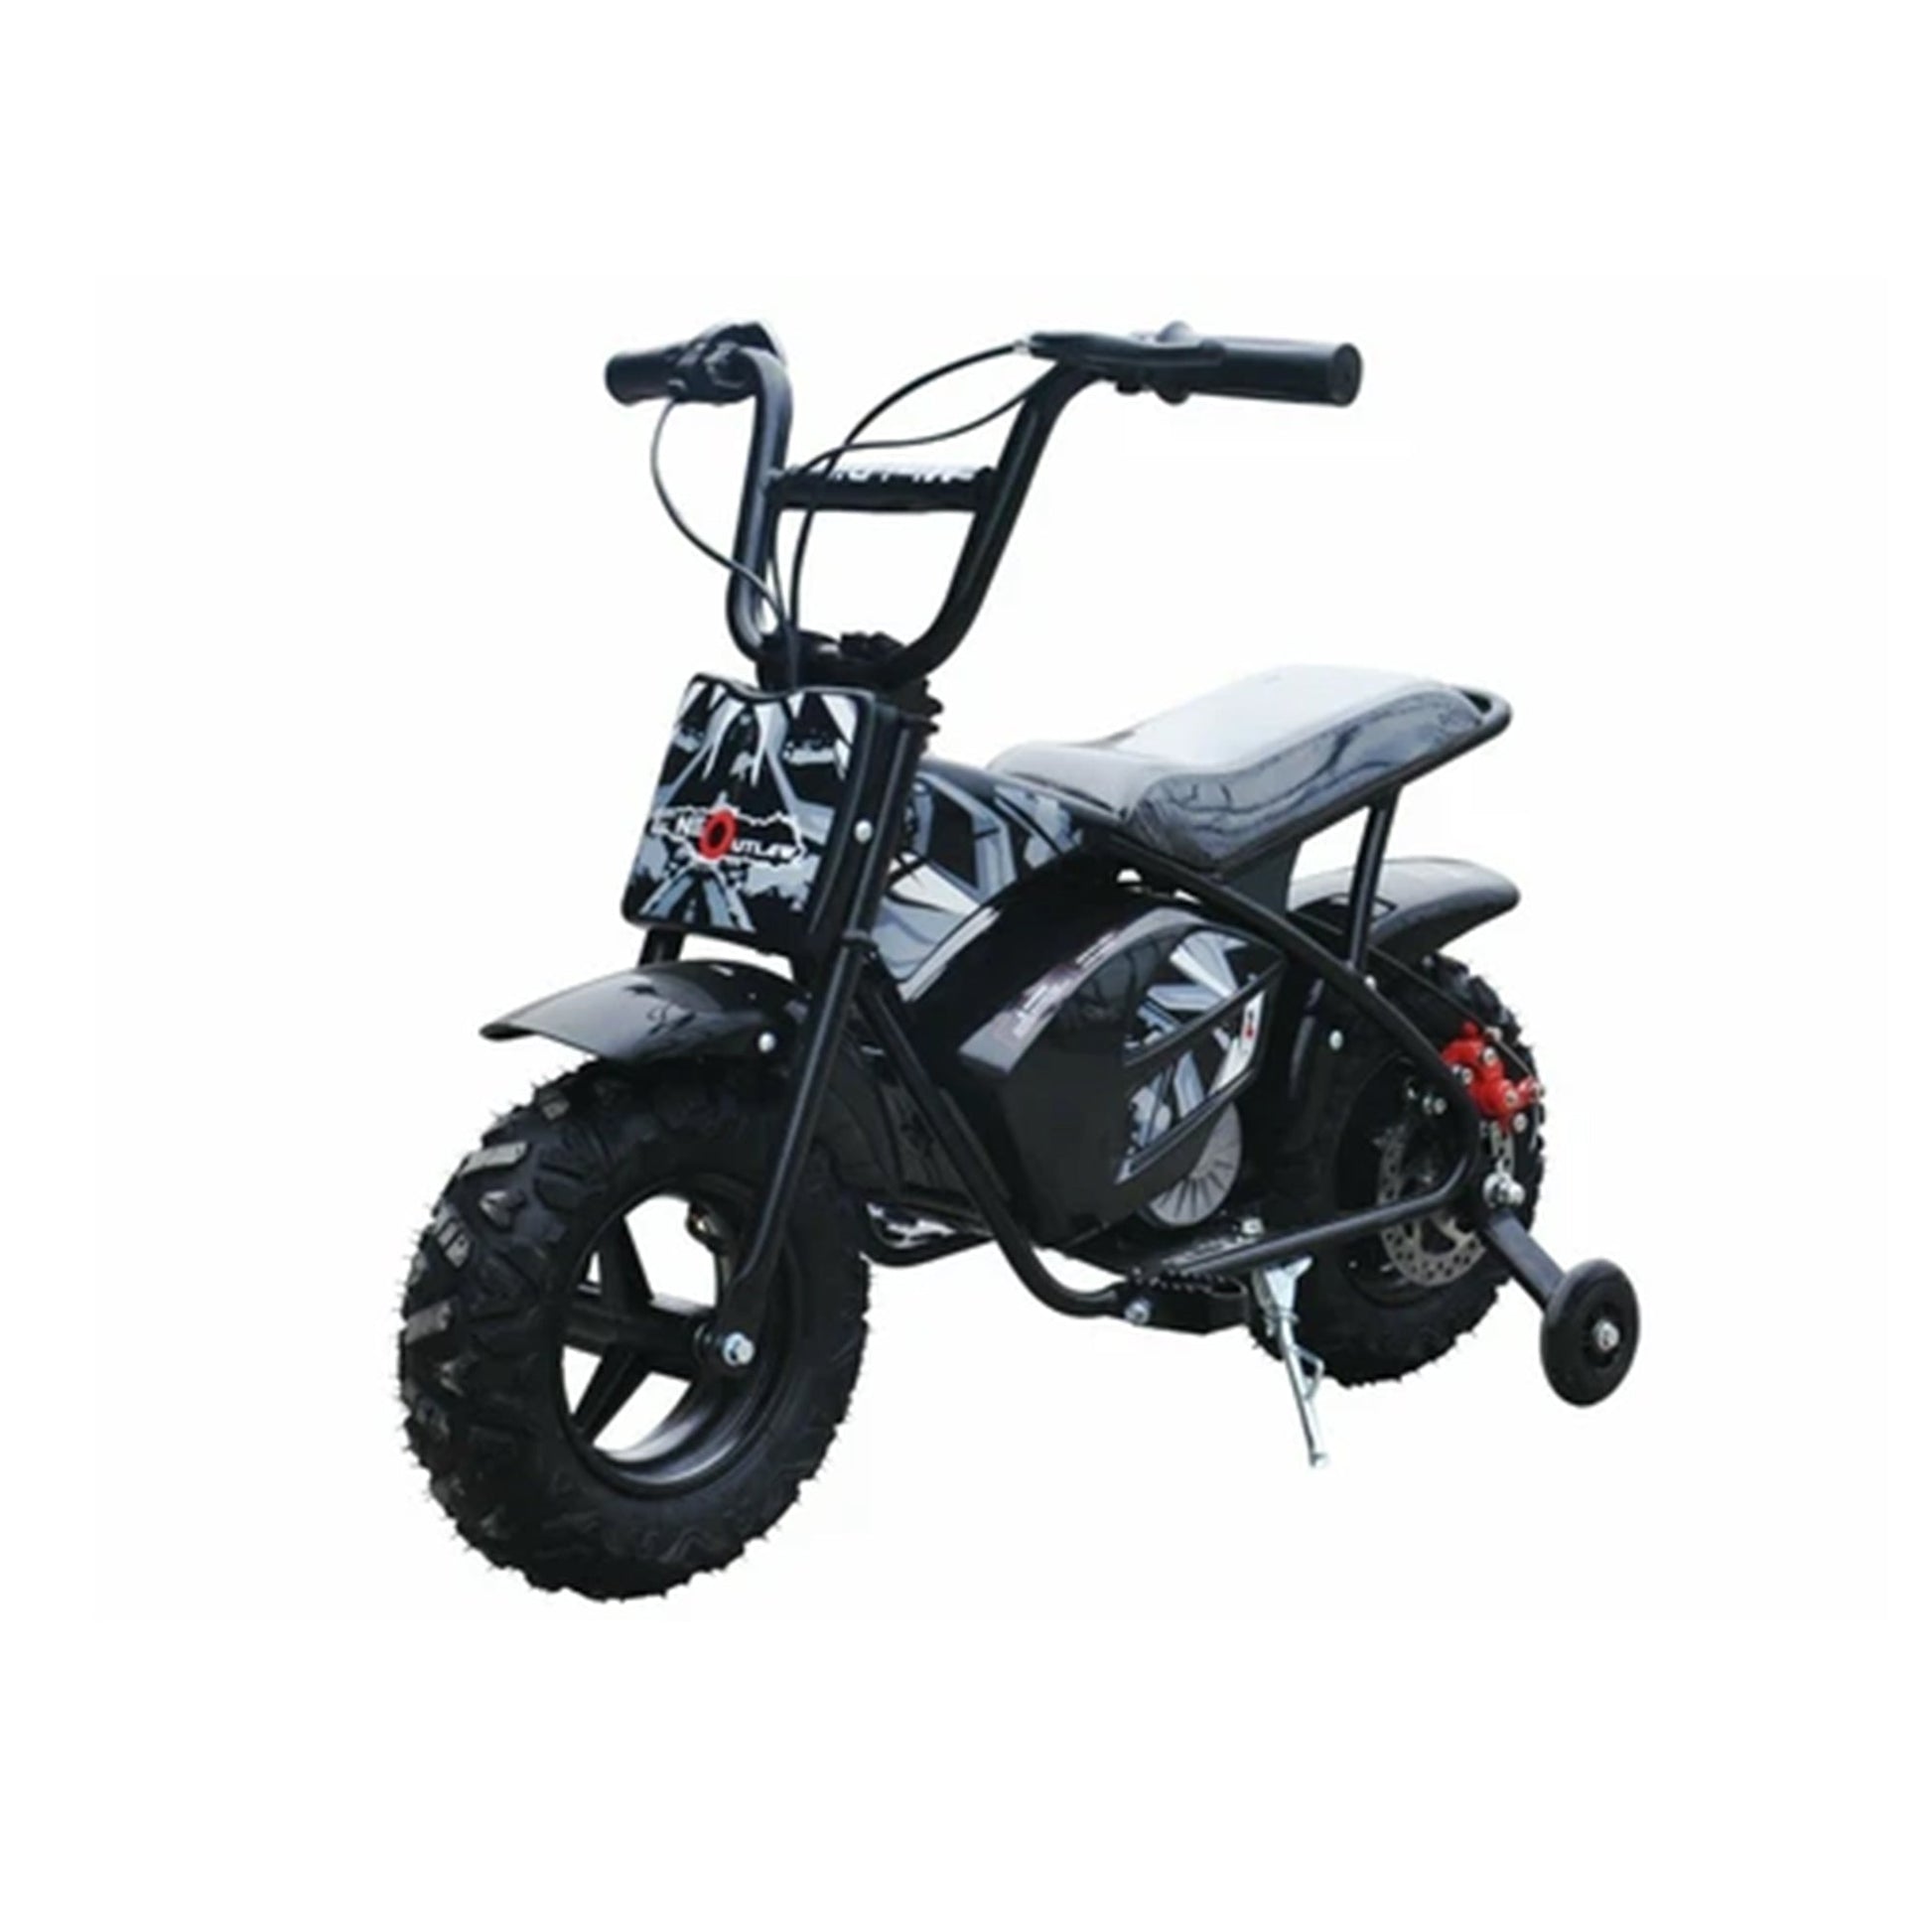 "Electric Mini Dirtbike Scrambler for kids, 250 Watt 12 Volt edition, with a twist and go throttle, displayed on a white background."